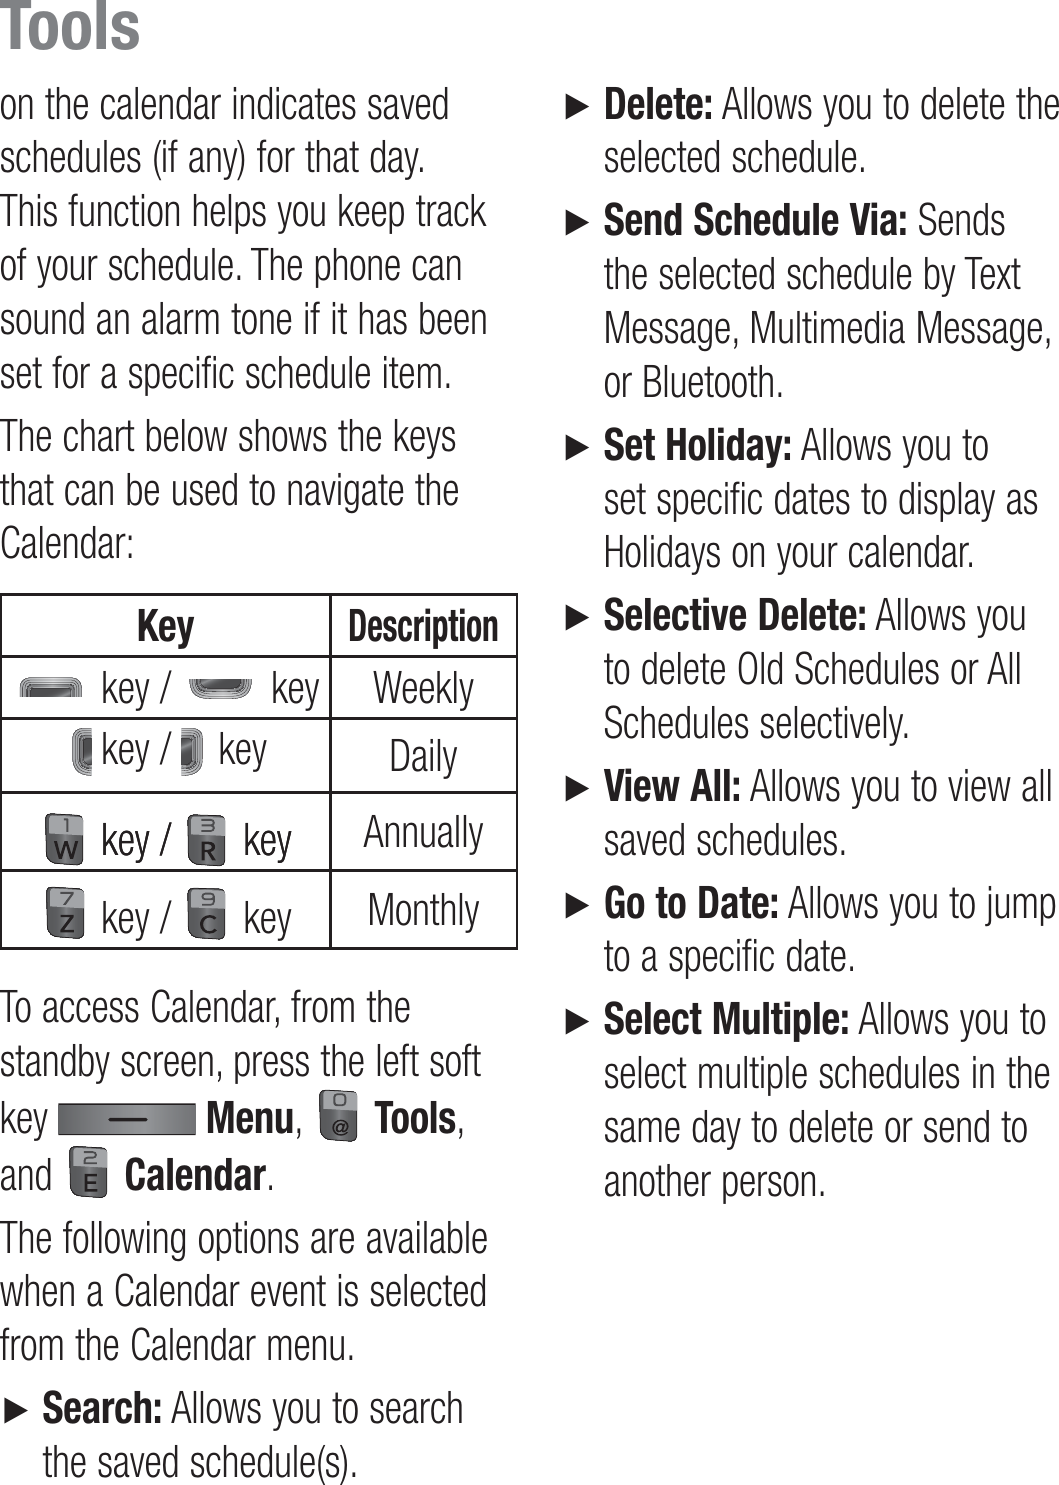 on the calendar indicates saved schedules (if any) for that day. This function helps you keep track of your schedule. The phone can sound an alarm tone if it has been set for a specific schedule item.The chart below shows the keys that can be used to navigate the Calendar:KeyDescription key /   key Weekly key /   key Daily key /key /   keykey Annually key /   key MonthlyTo access Calendar, from the standby screen, press the left soft key   Menu,   Tools, and   Calendar.The following options are available when a Calendar event is selected from the Calendar menu.►    Search: Allows you to search the saved schedule(s).►   Delete: Allows you to delete the selected schedule.►   Send Schedule Via: Sends the selected schedule by Text Message, Multimedia Message, or Bluetooth.►   Set Holiday: Allows you to set specific dates to display as Holidays on your calendar.►   Selective Delete: Allows you to delete Old Schedules or All Schedules selectively.►   View All: Allows you to view all saved schedules.►   Go to Date: Allows you to jump to a specific date.►   Select Multiple: Allows you to select multiple schedules in the same day to delete or send to another person.Tools